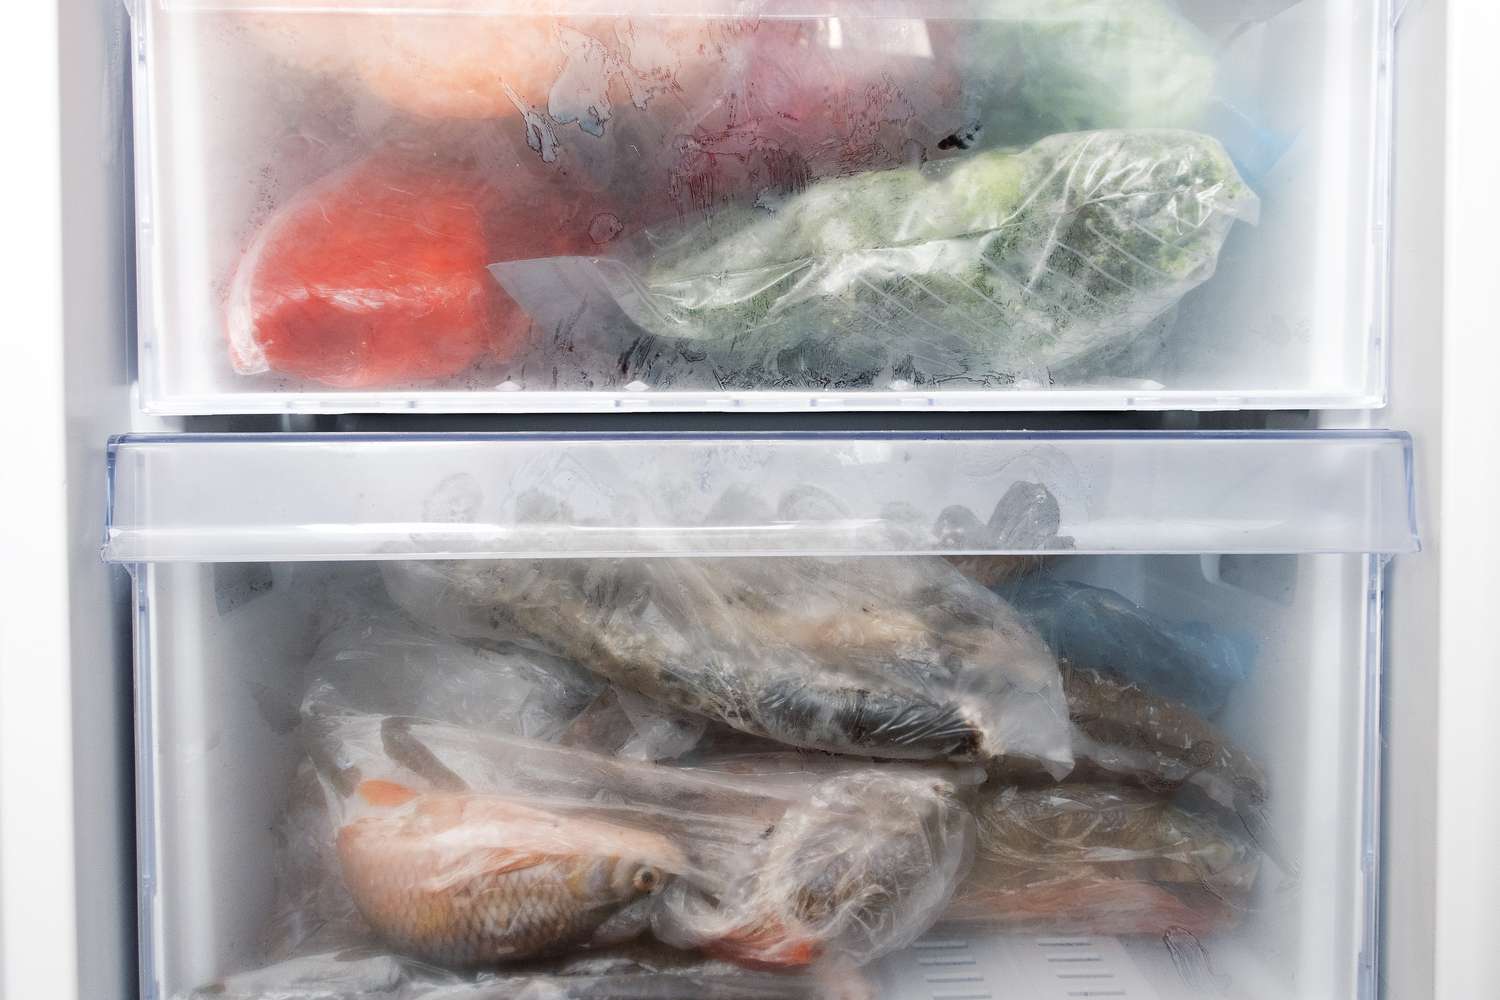 How To Store Fish In Freezer